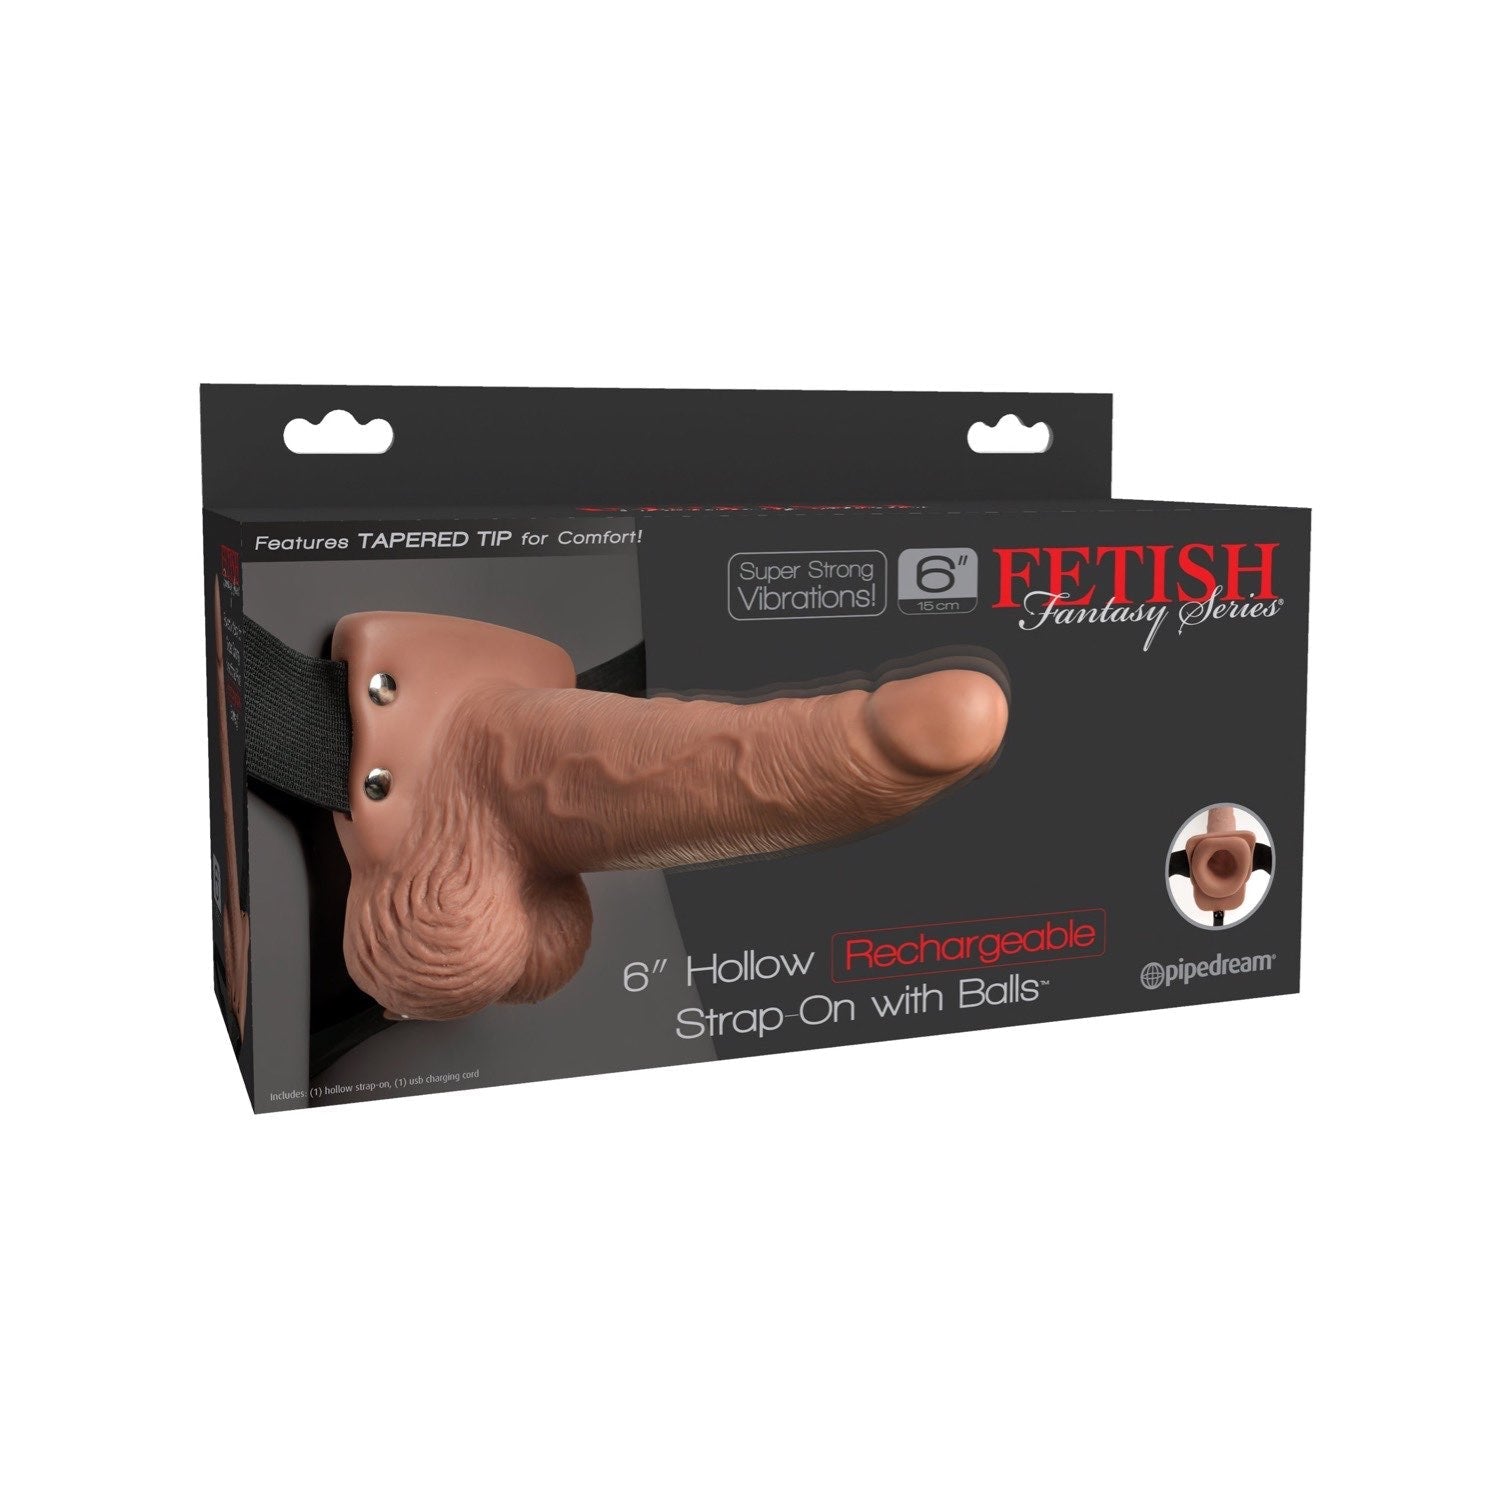 Fetish Fantasy Series 6&quot; Hollow Rechargeable Strap-On with Balls - Tan 15.2 cm Vibrating Hollow Strap-On by Pipedream